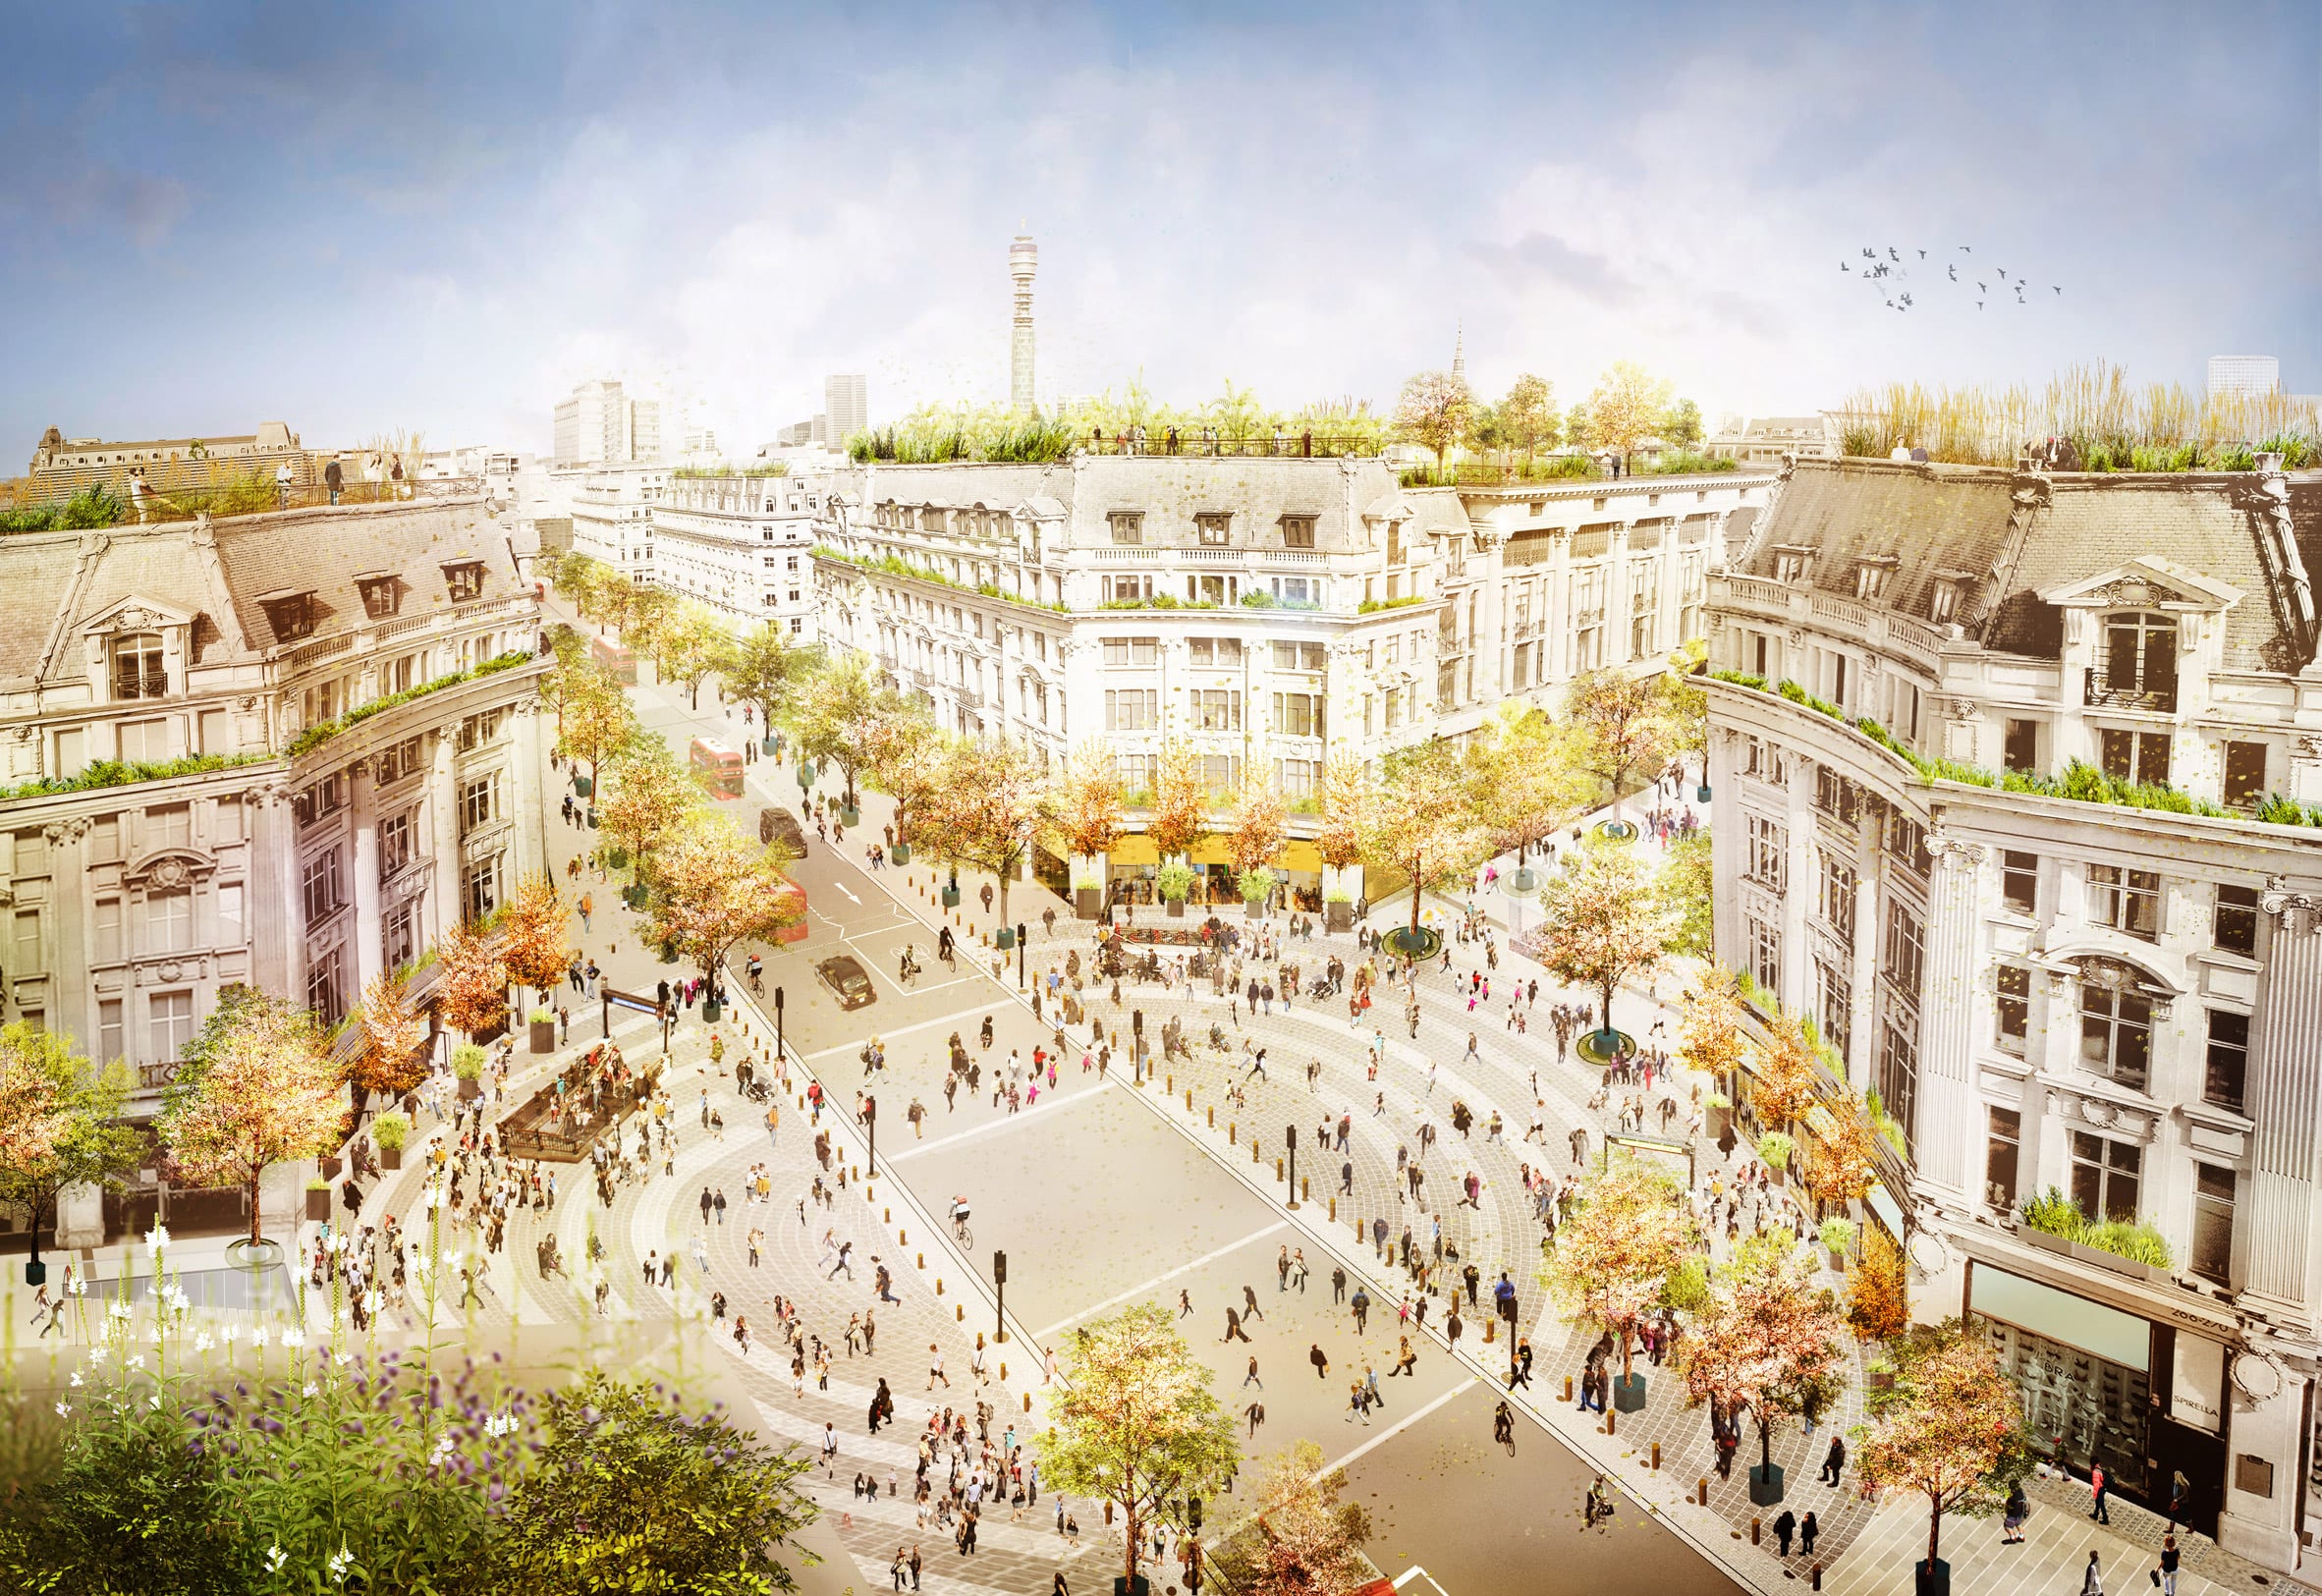 A visual of Oxford Circus pedestrianised